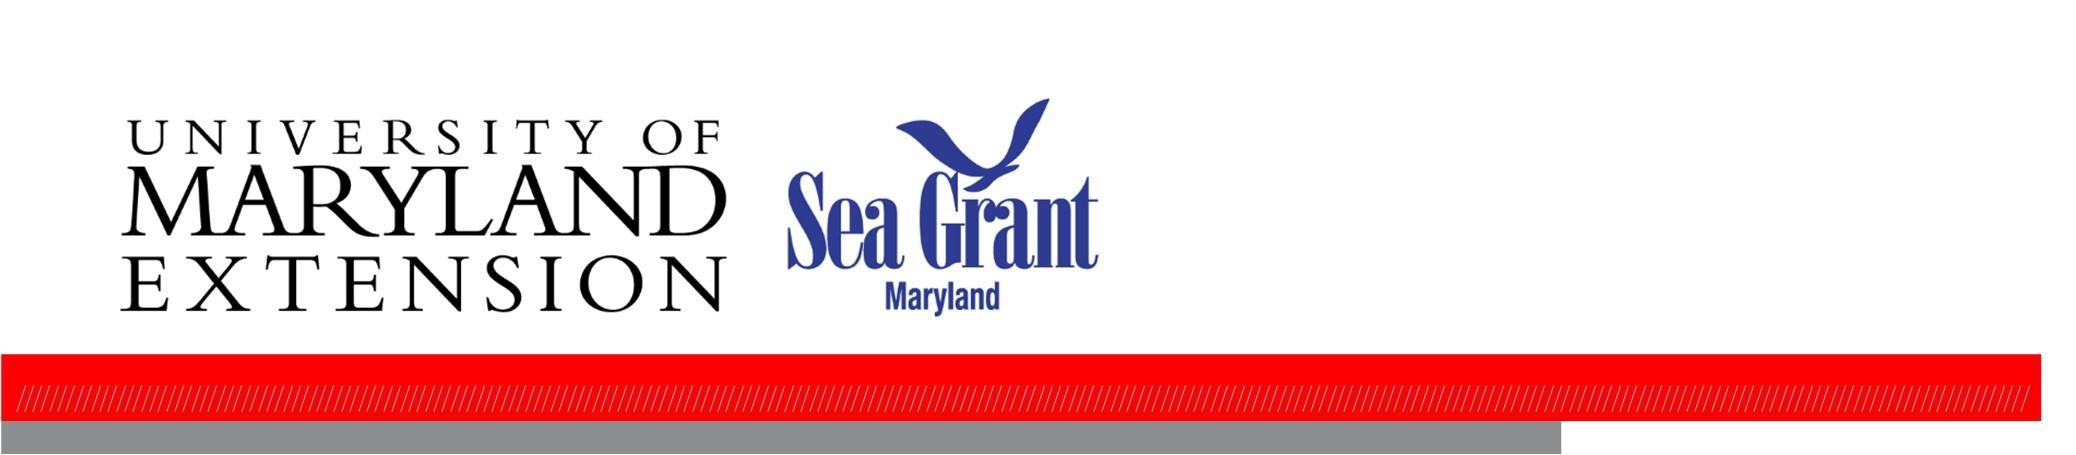 Publication header containing the Univeristy of Maryland Extension and Sea Grant logos